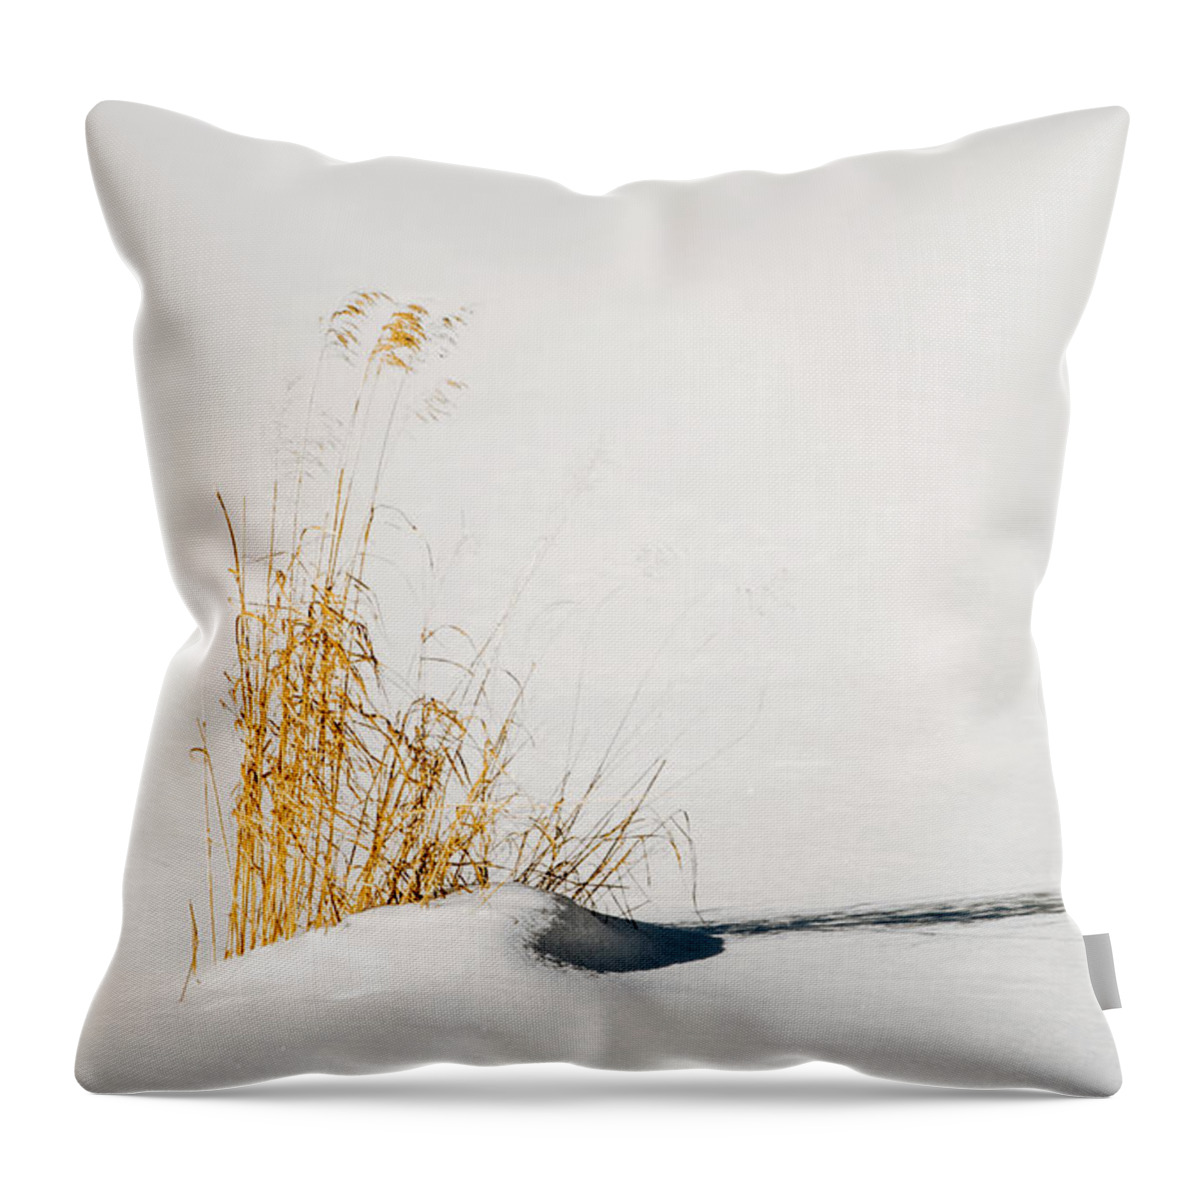 Grass Throw Pillow featuring the photograph Desolate by Tim Beebe